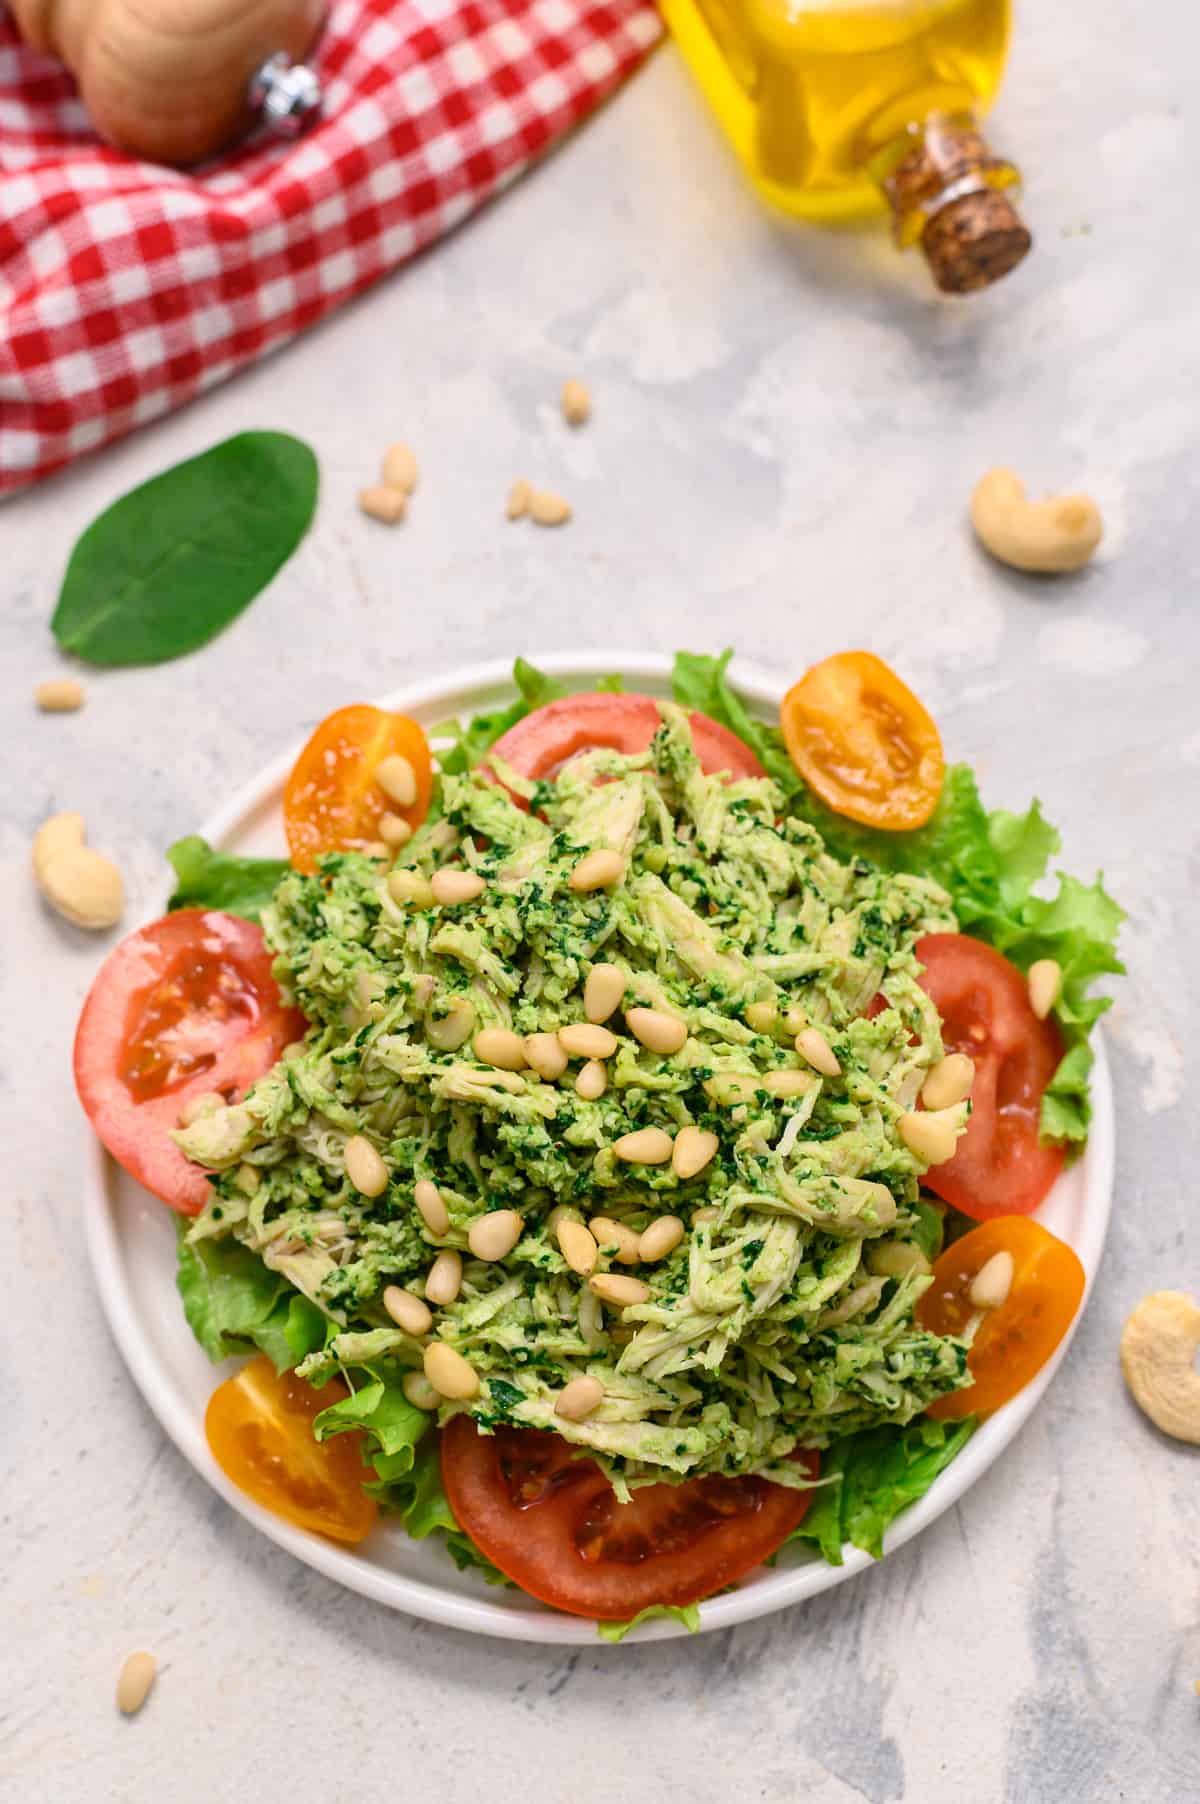 Chicken salad with pesto on a plate served over a bed of lettuce and tomatoes.